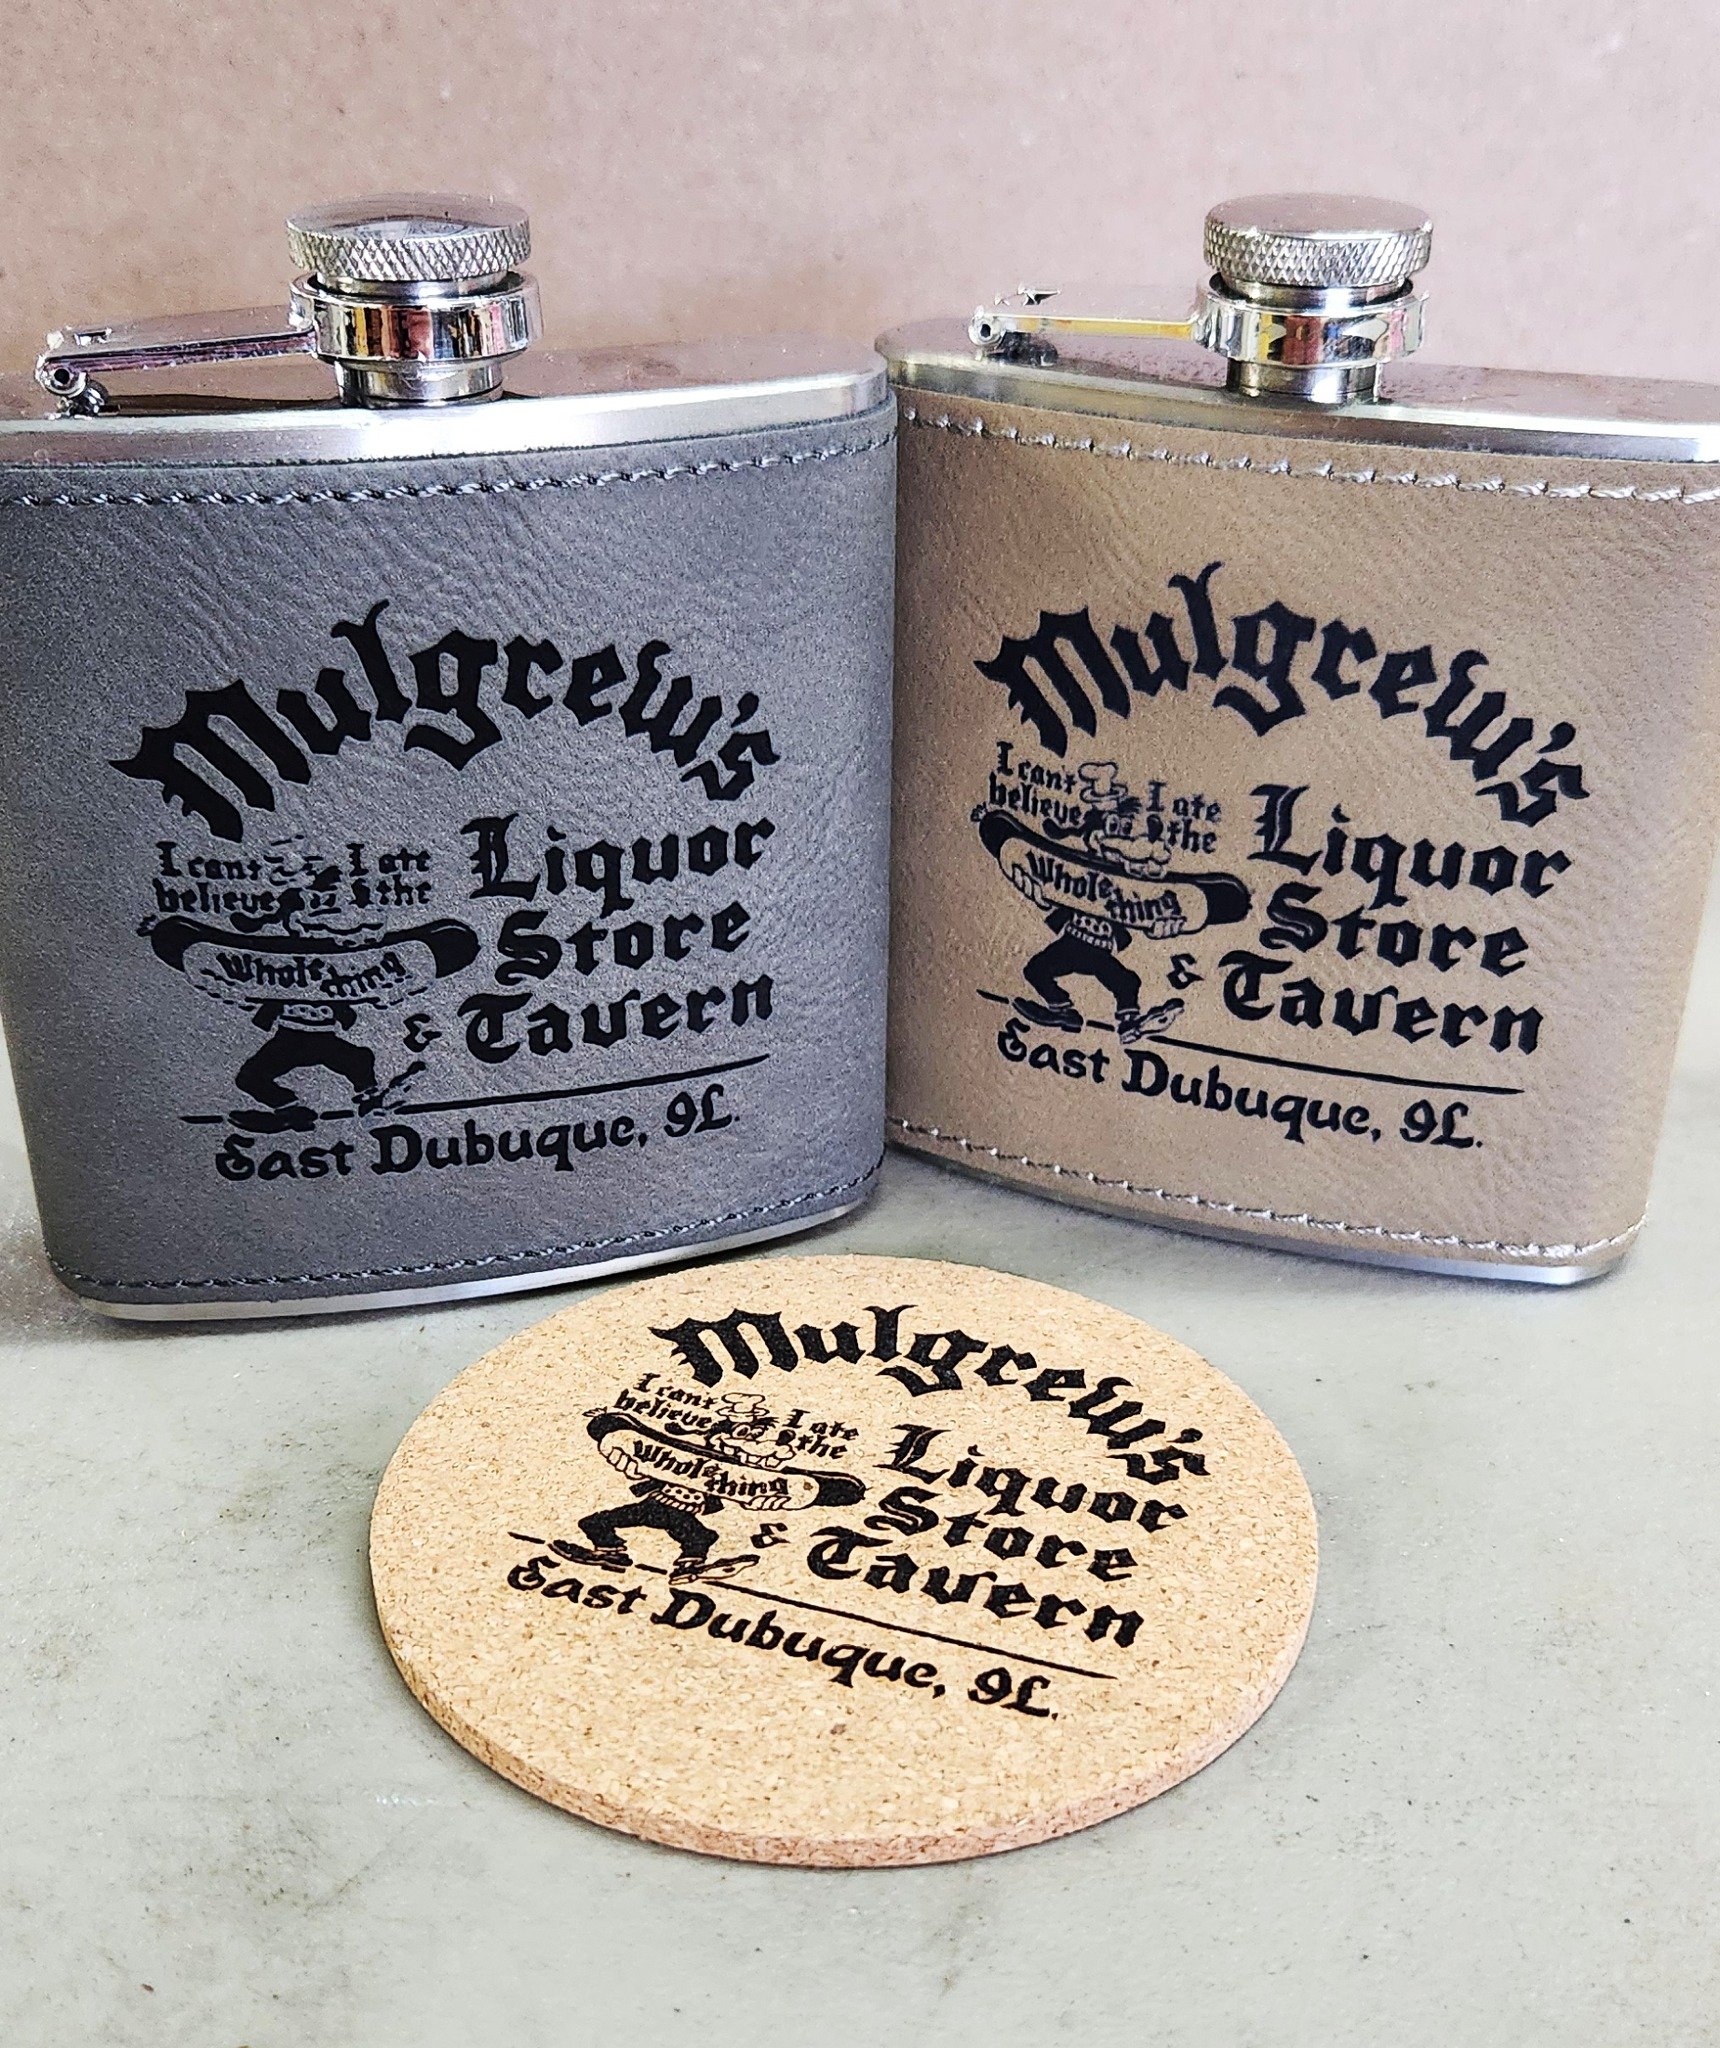 Check out these new laser-engraved products that just left our shop and will be for sale at 231 Coffee/Bar &amp; Gaming and Mulgrew's Tavern, Slots &amp; Liquor Store  Go support local businesses in the East Dubuque Area. #zalaznikcreative #eastdubuq